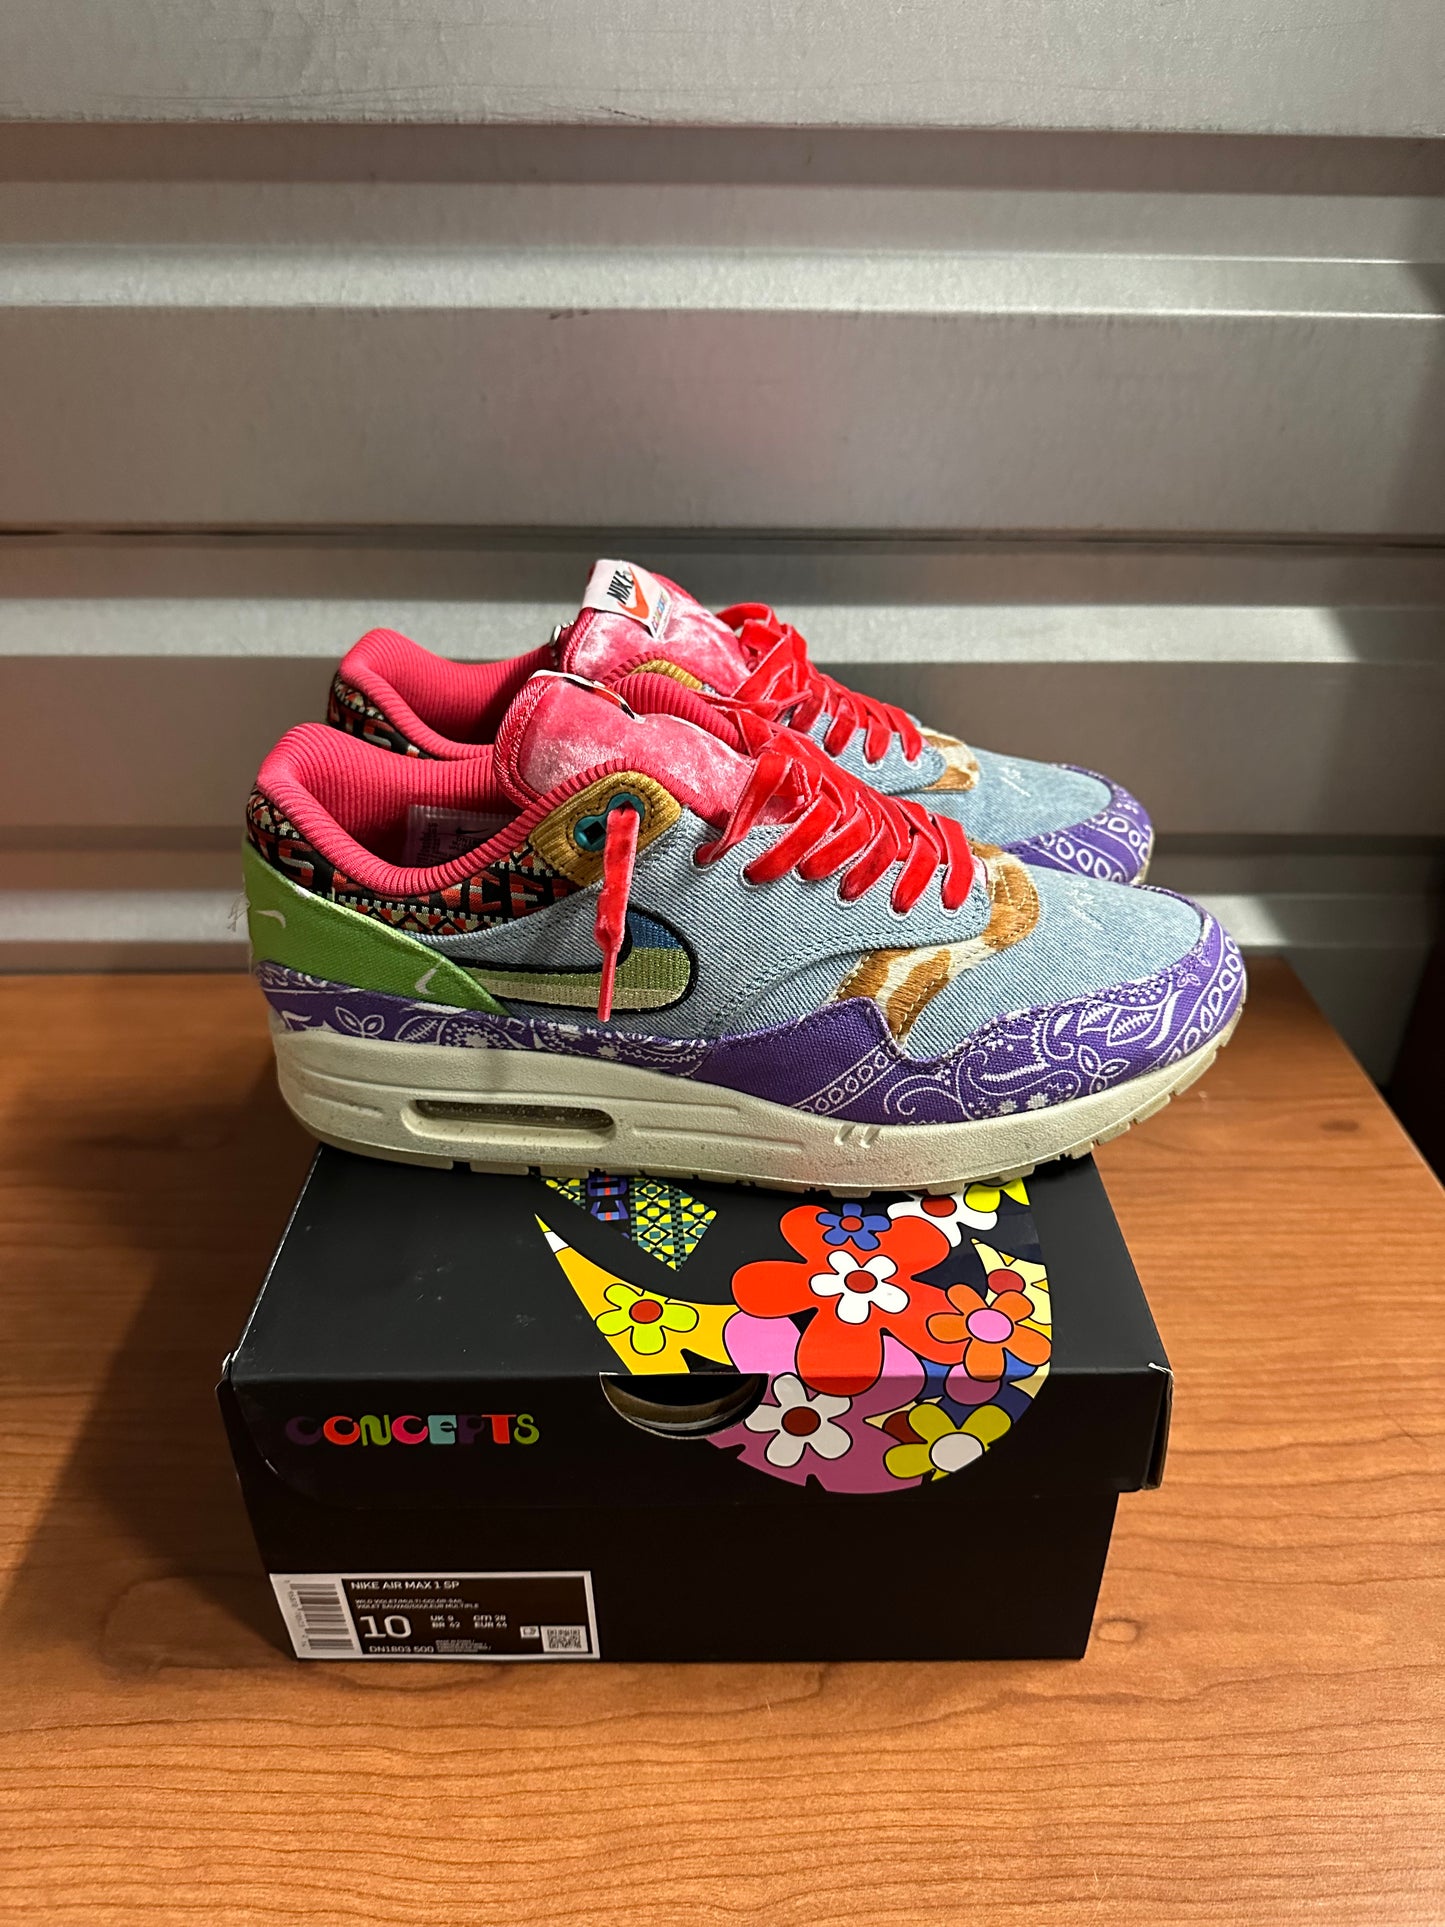 Nike Air Max 1 SP "Concepts Far Out Special Box"